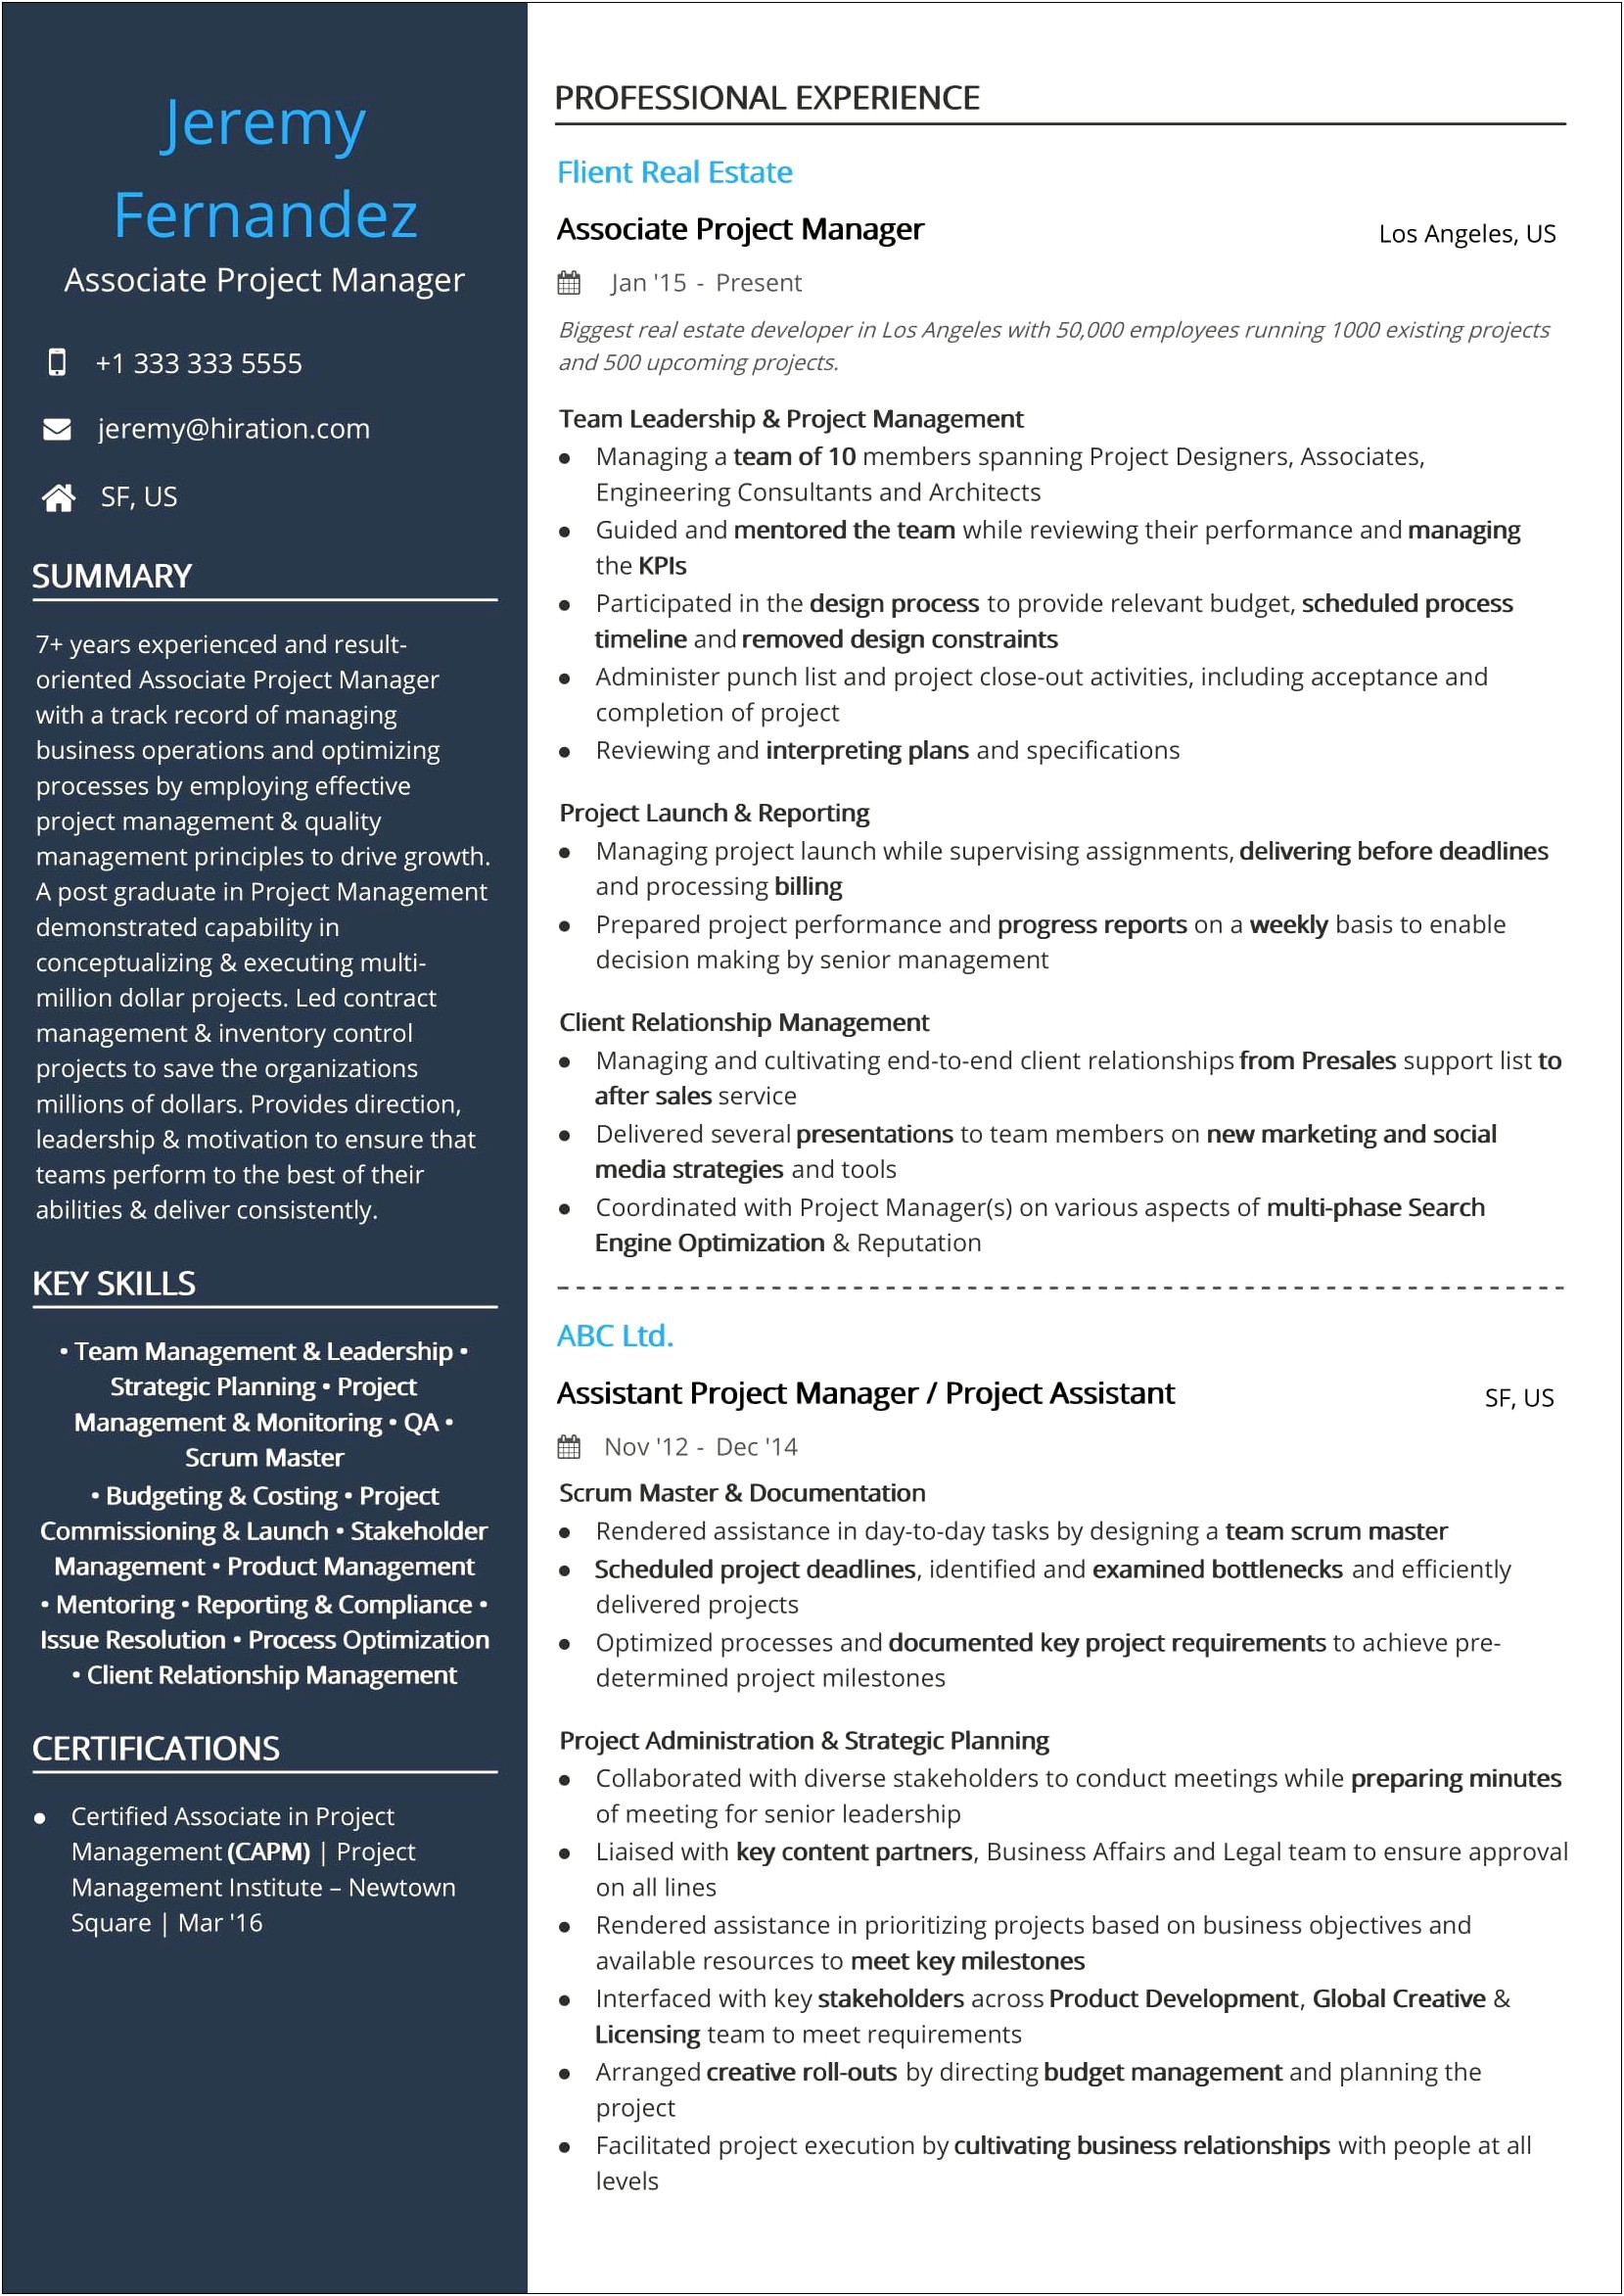 Construction Project Manager Resume India